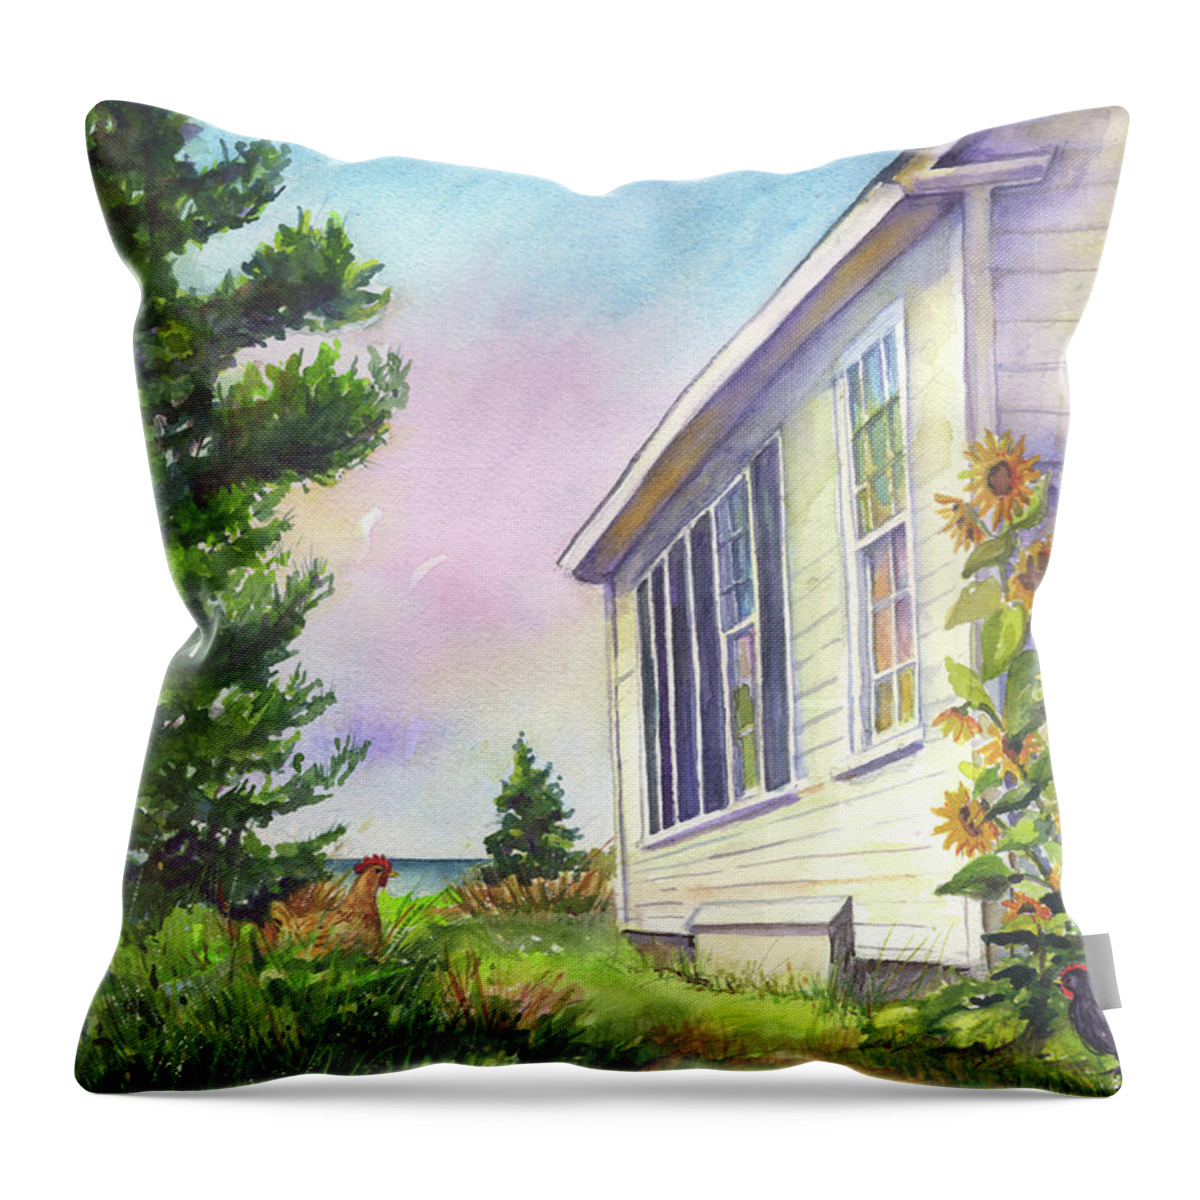 Monhegan Throw Pillow featuring the painting After School Activities at Monhegan School House by Susan Herbst